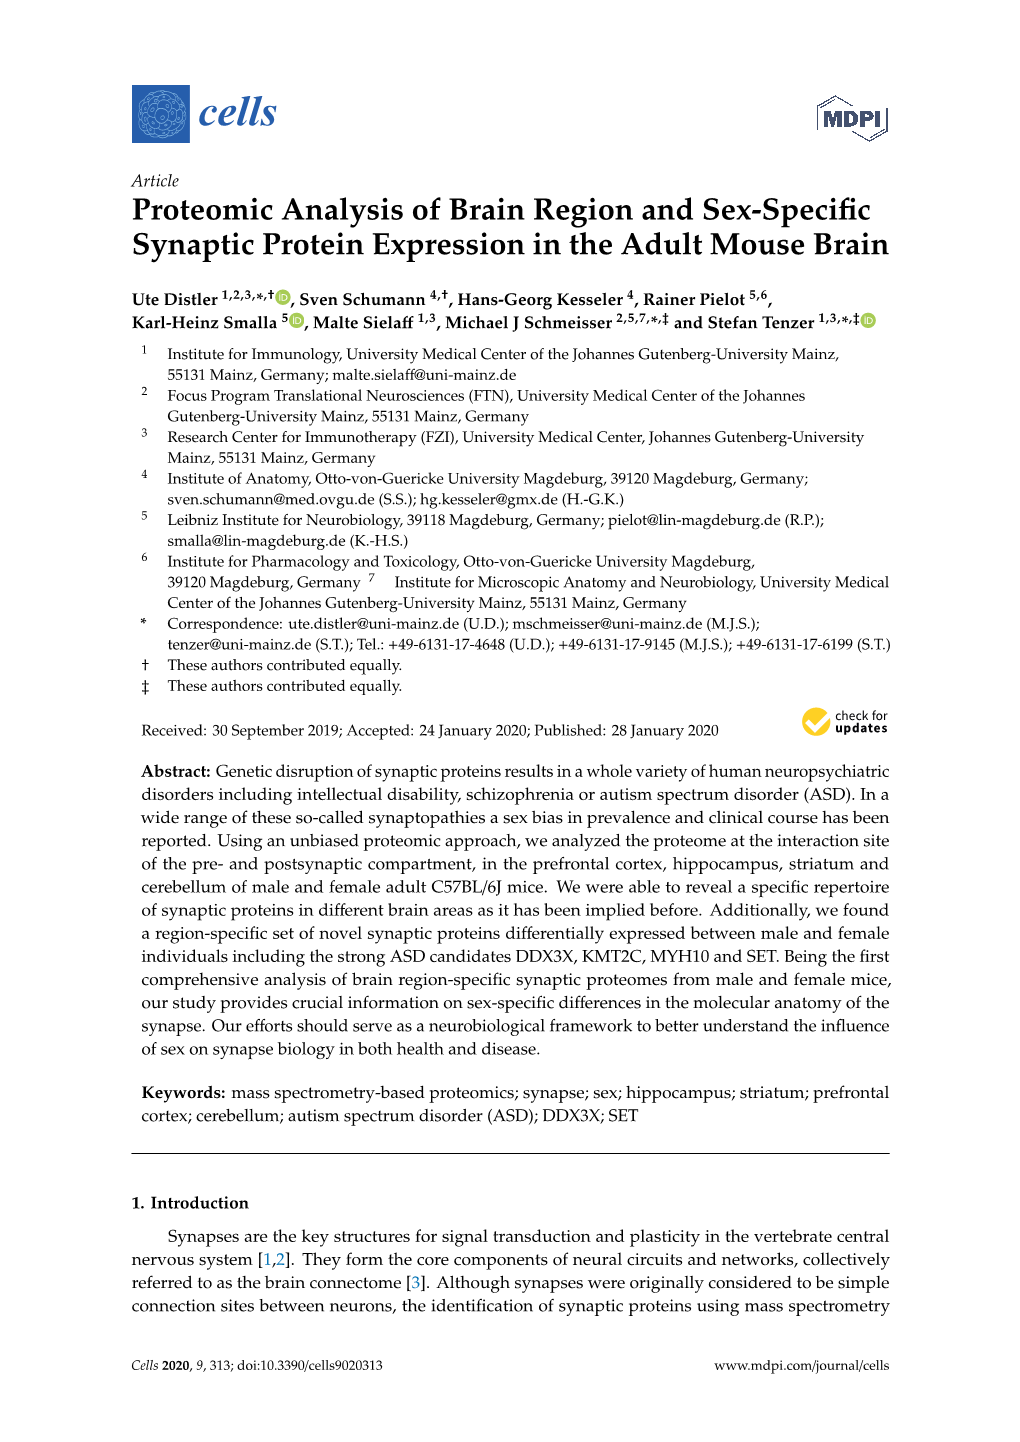 Proteomic Analysis of Brain Region and Sex-Specific Synaptic Protein Expression in the Adult Mouse Brain